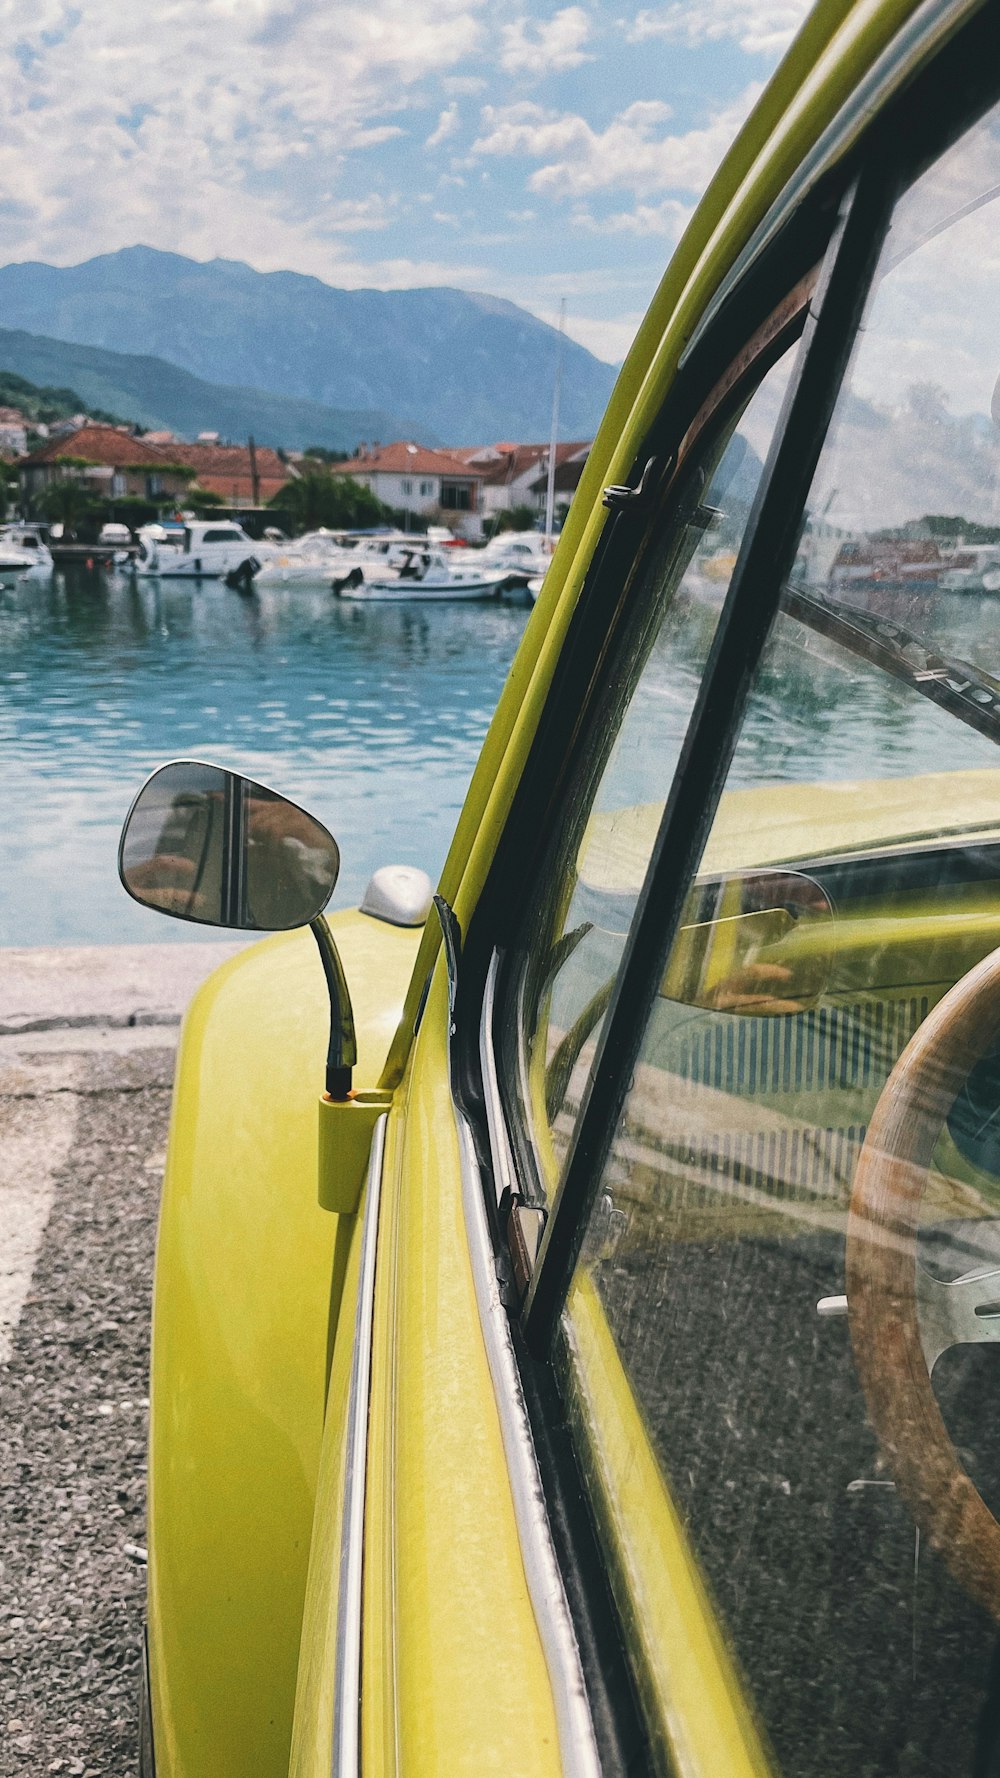 a yellow car parked next to a body of water